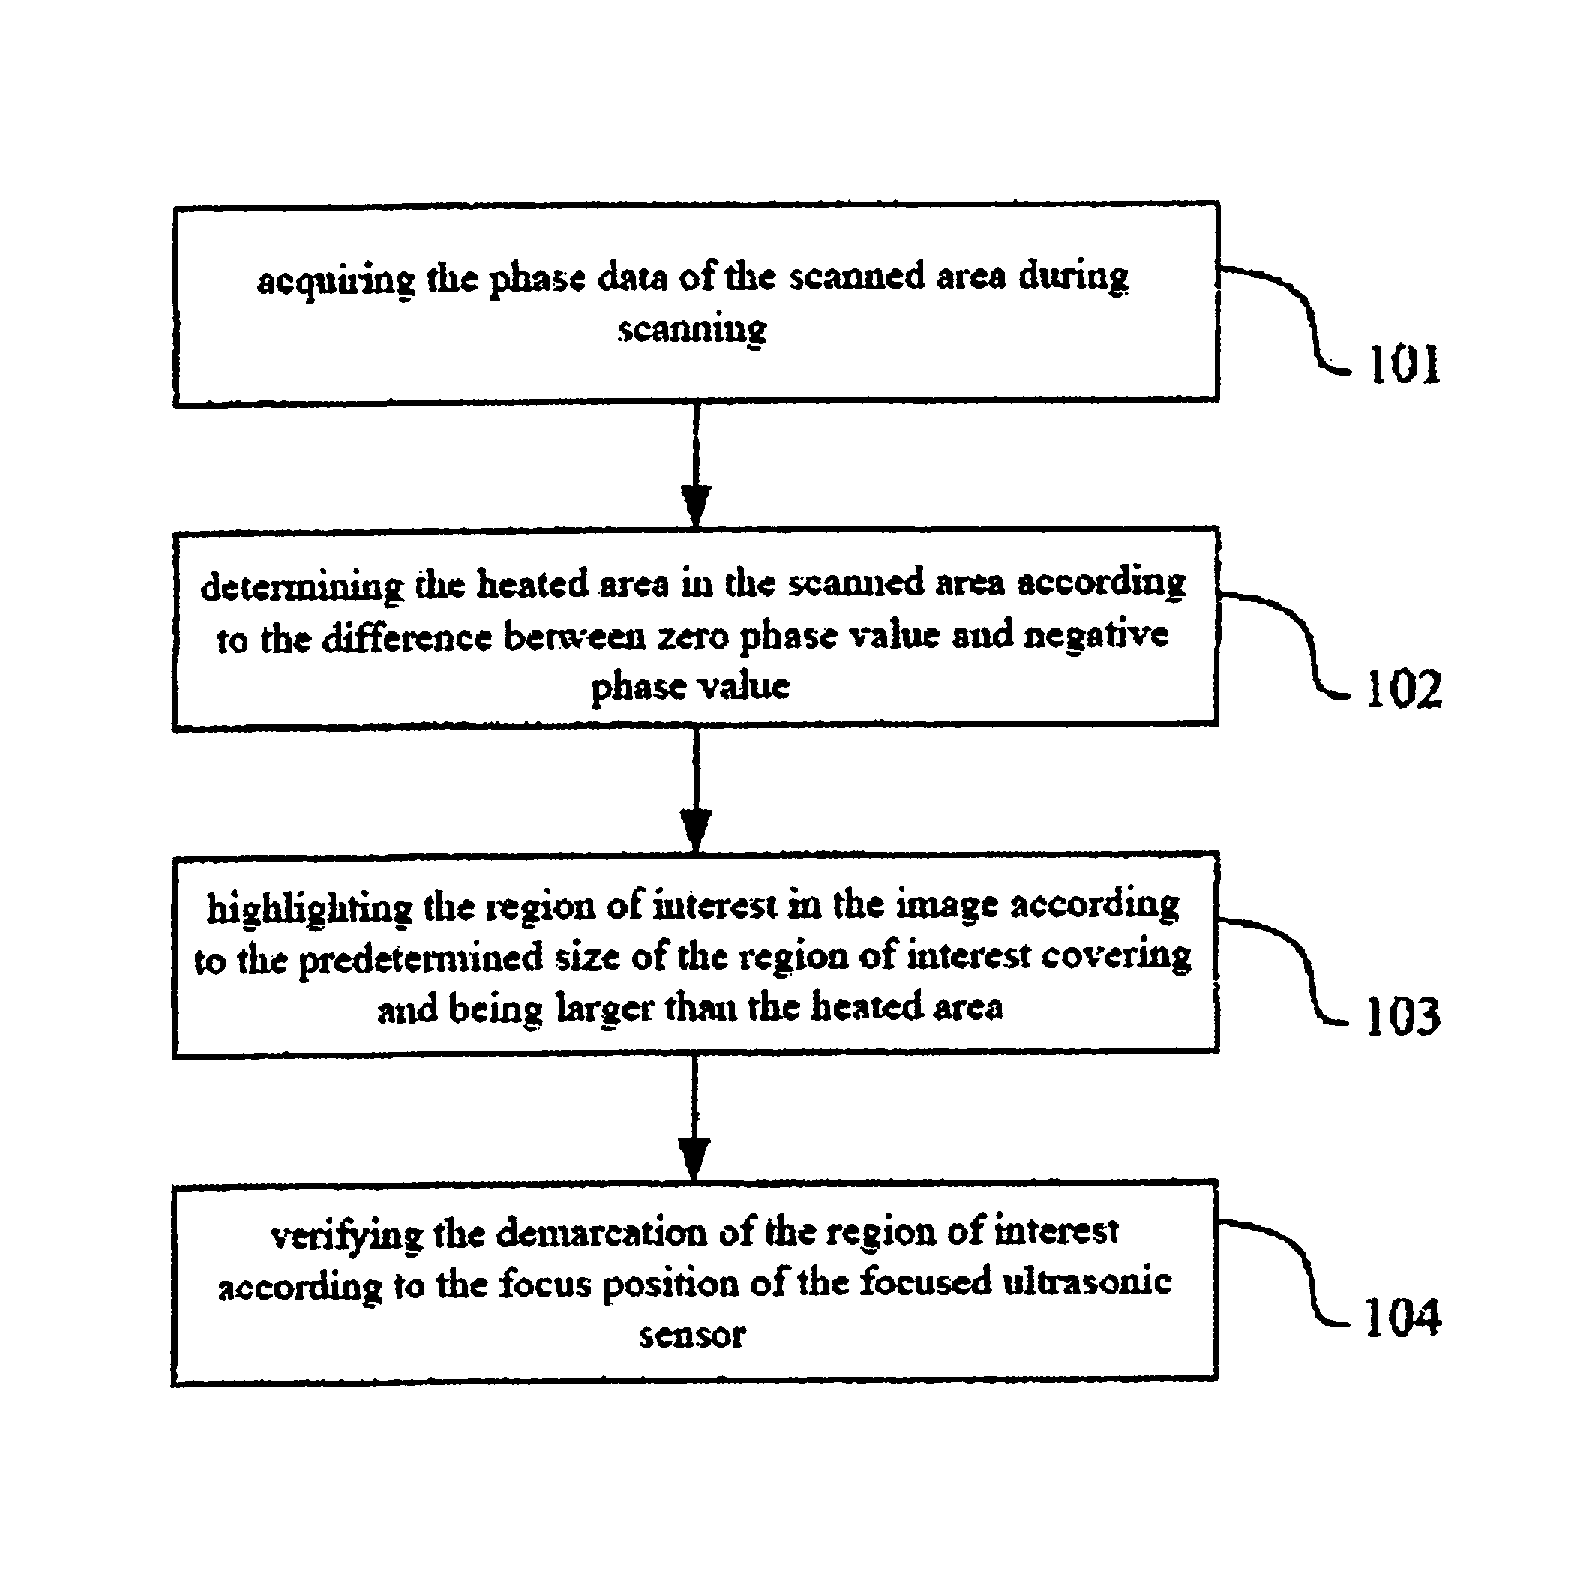 Method for automatically selecting region of interest covering heated area